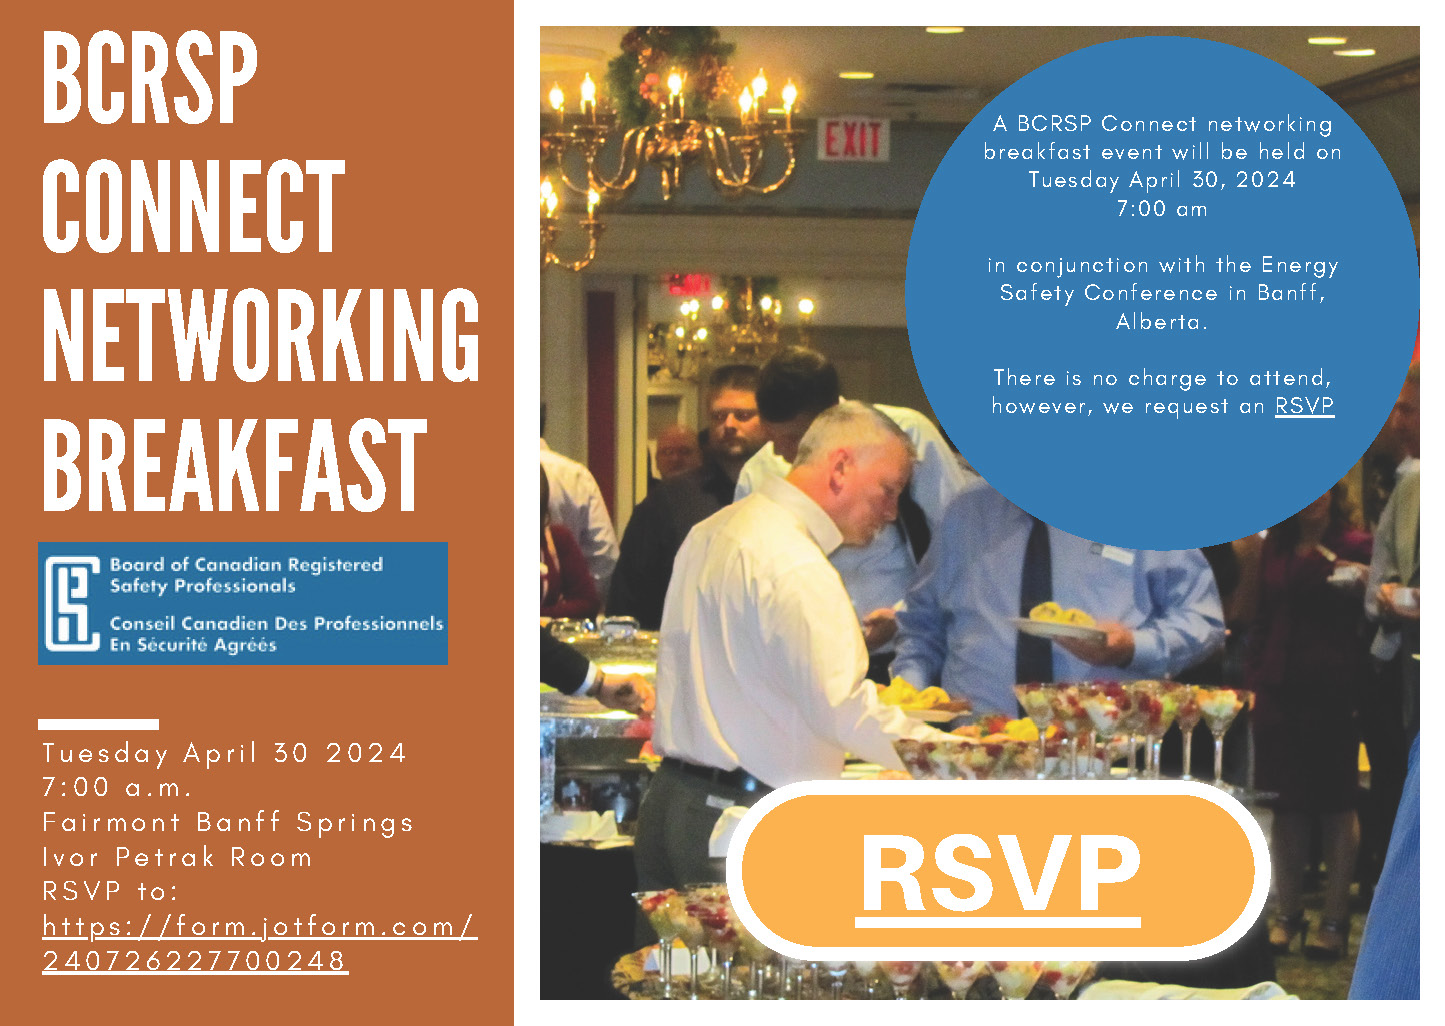 BCRSP Connect Networking Breakfast April 30 2024 7:00 am with photo of people at buffet and RSVP link to https://form.jotform.com/240726227700248